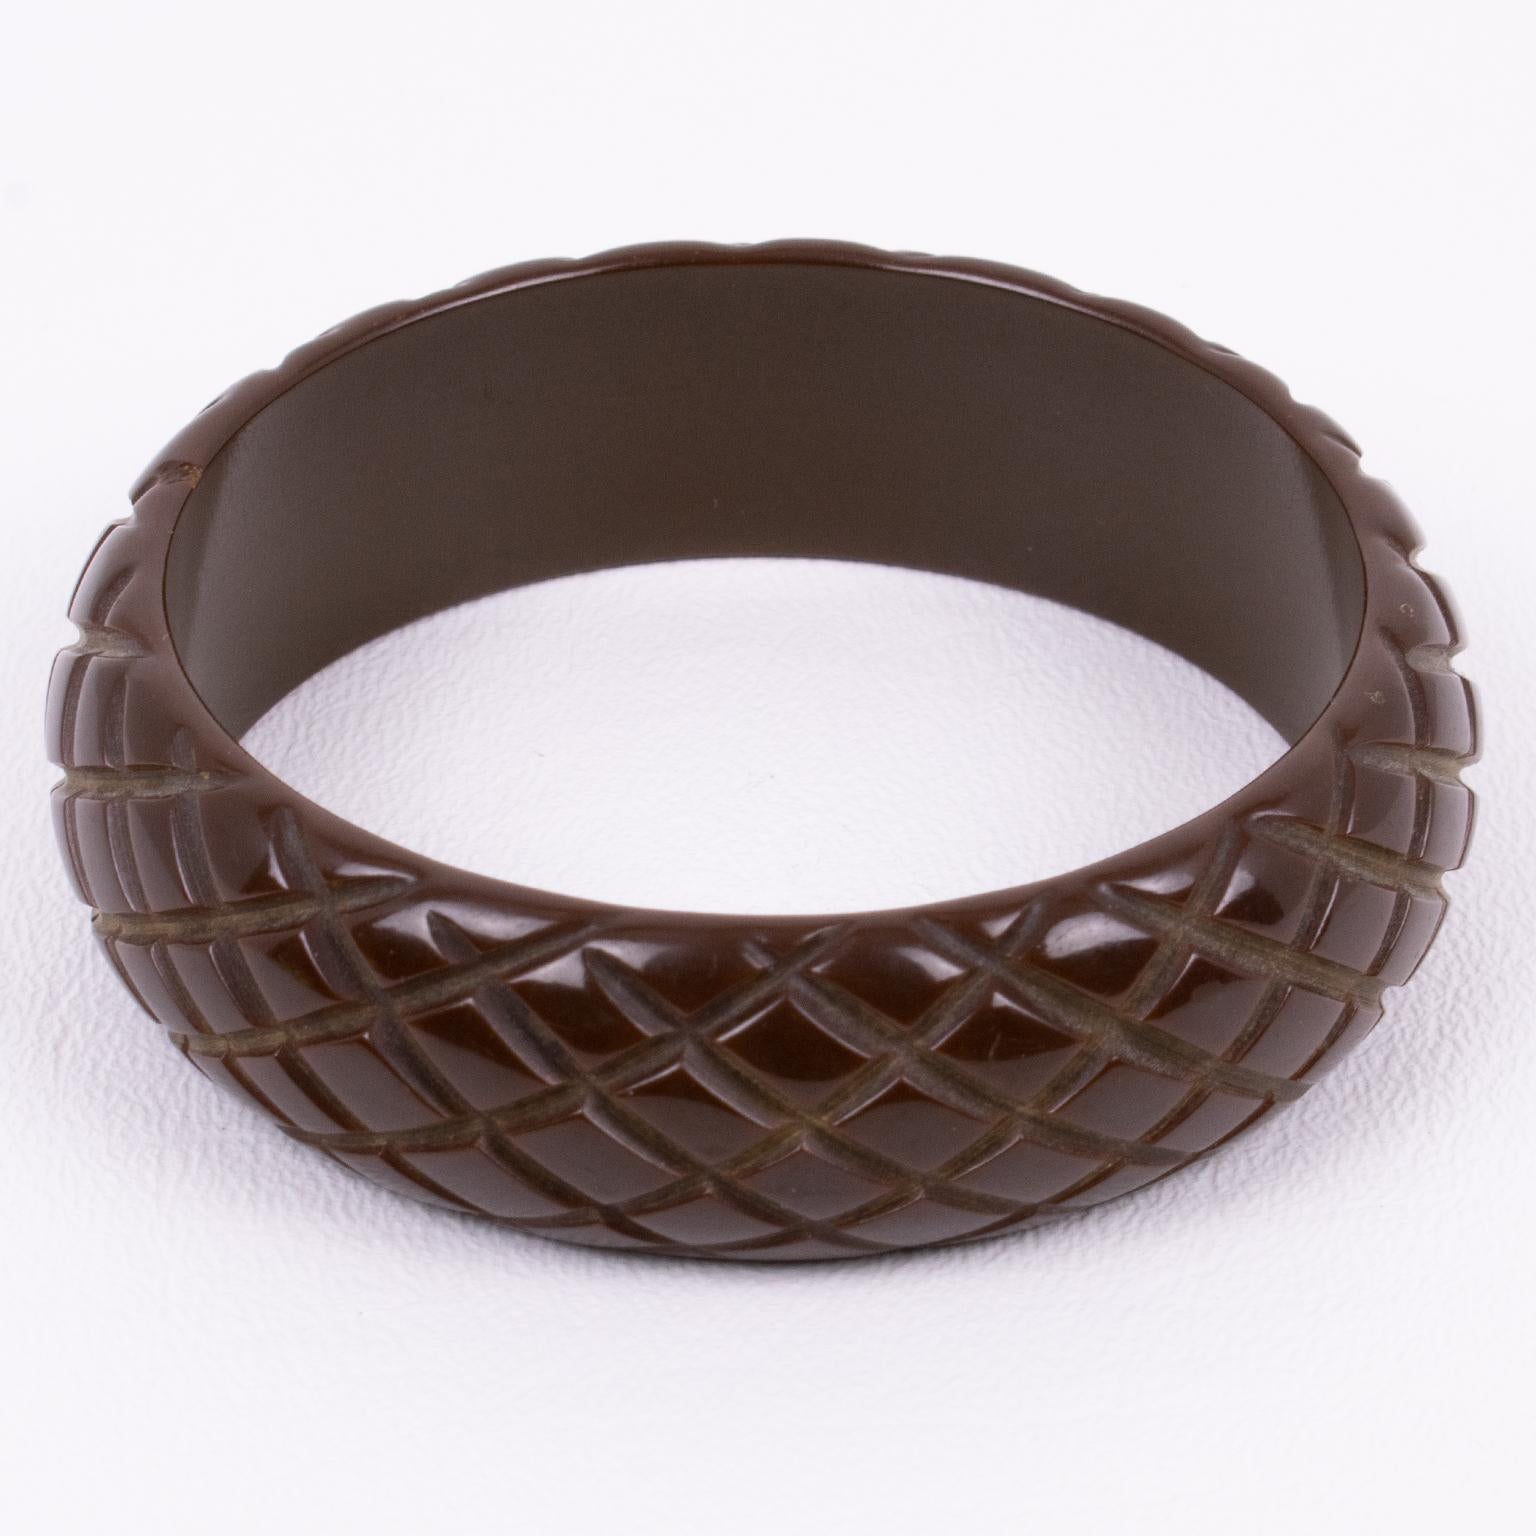 This stunning cocoa brown Bakelite carved bracelet bangle features a chunky domed shape with deep pineapple carving. Its bold and beautiful design displays stripes all around. The cocoa brown color is warm and intense.
Measurements: Inside across is